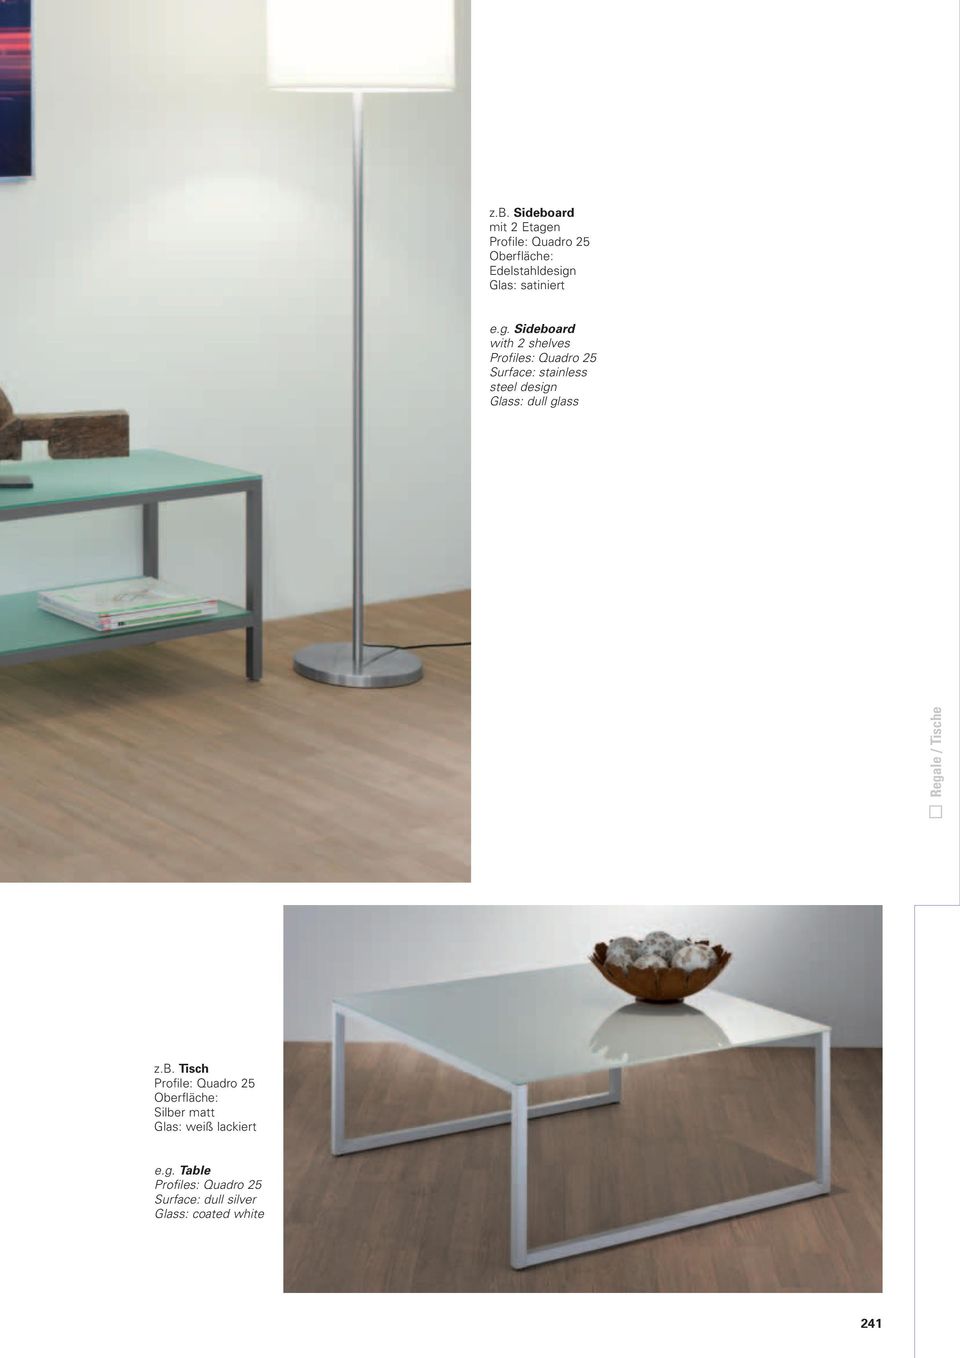 Sideboard with 2 shelves Profiles: Quadro 25 Surface: stainless steel design Glass: dull